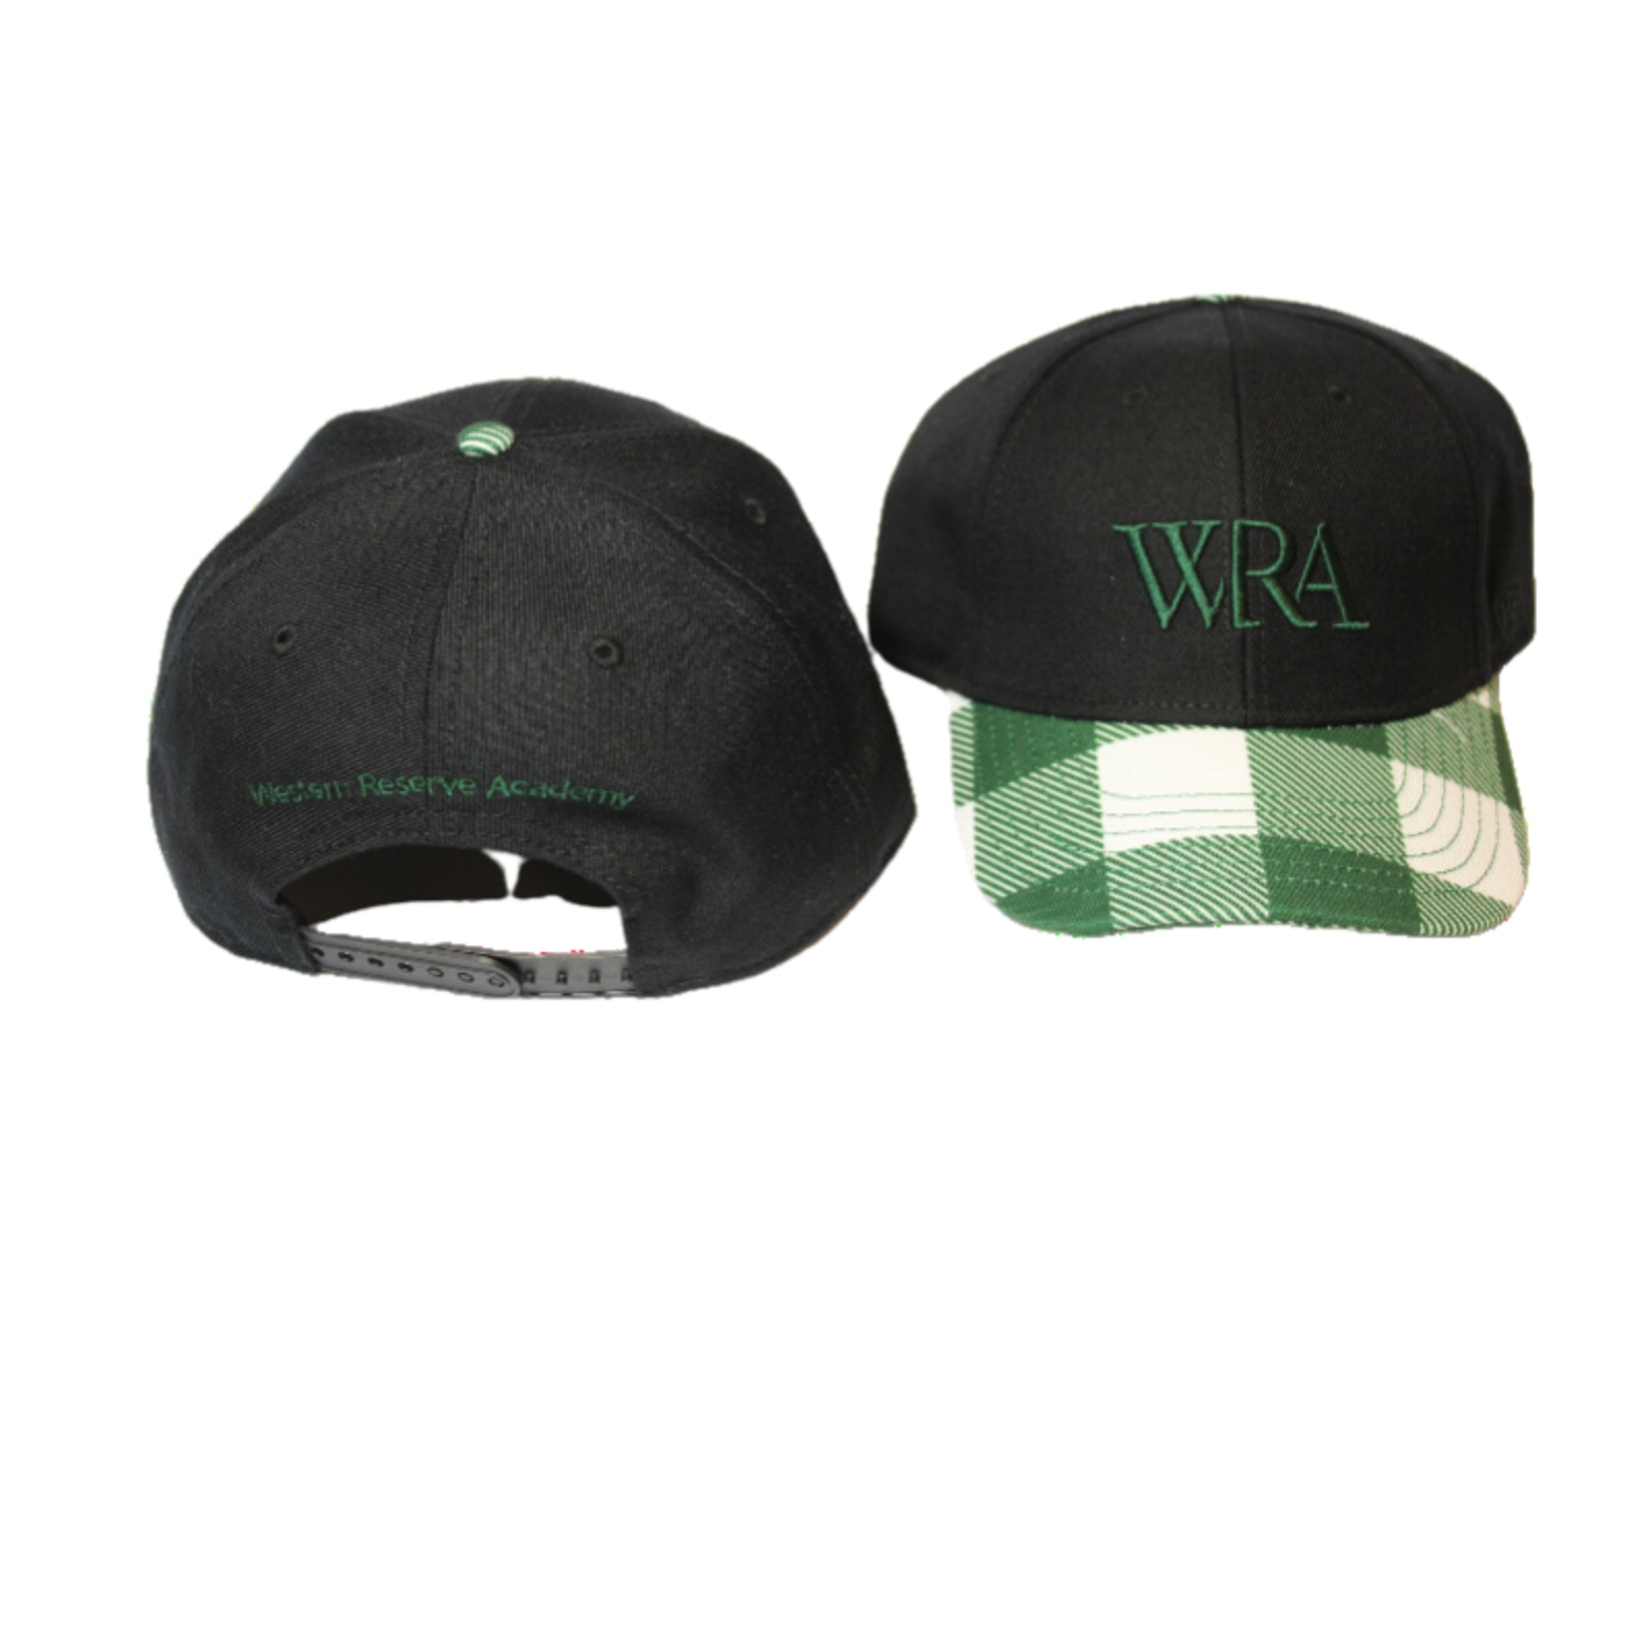 Top of The World Cap Black with Plaid Bill